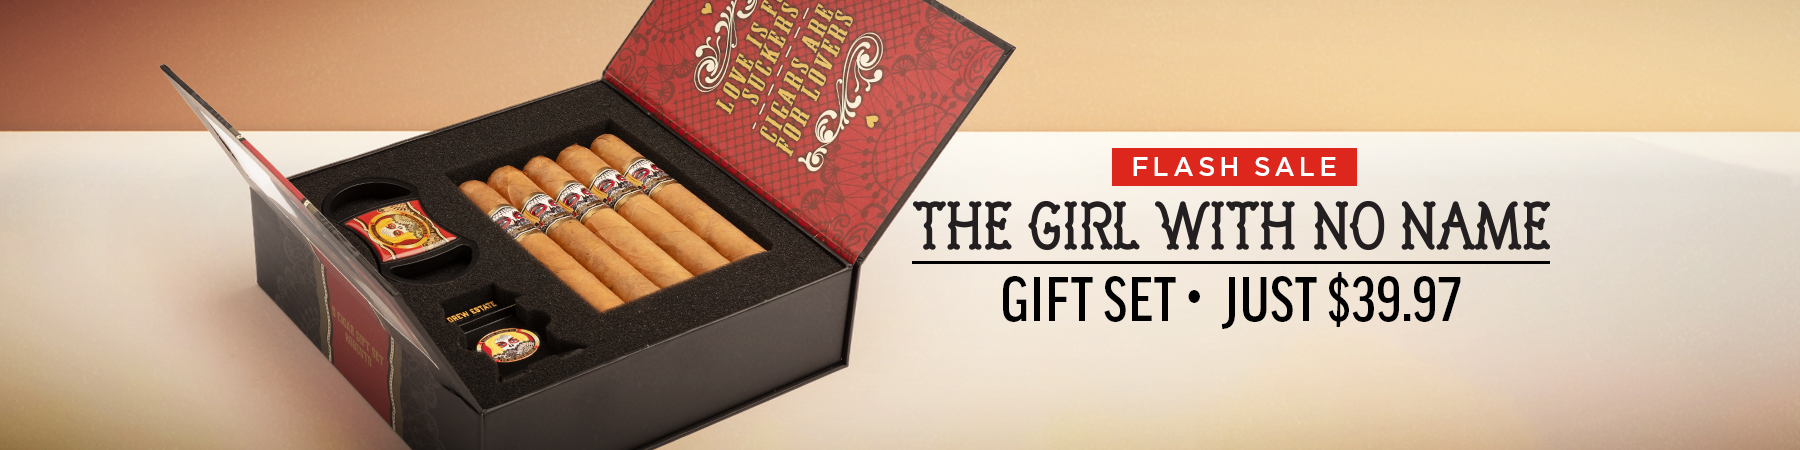 Girl With No Name Gift Set Just $39.97